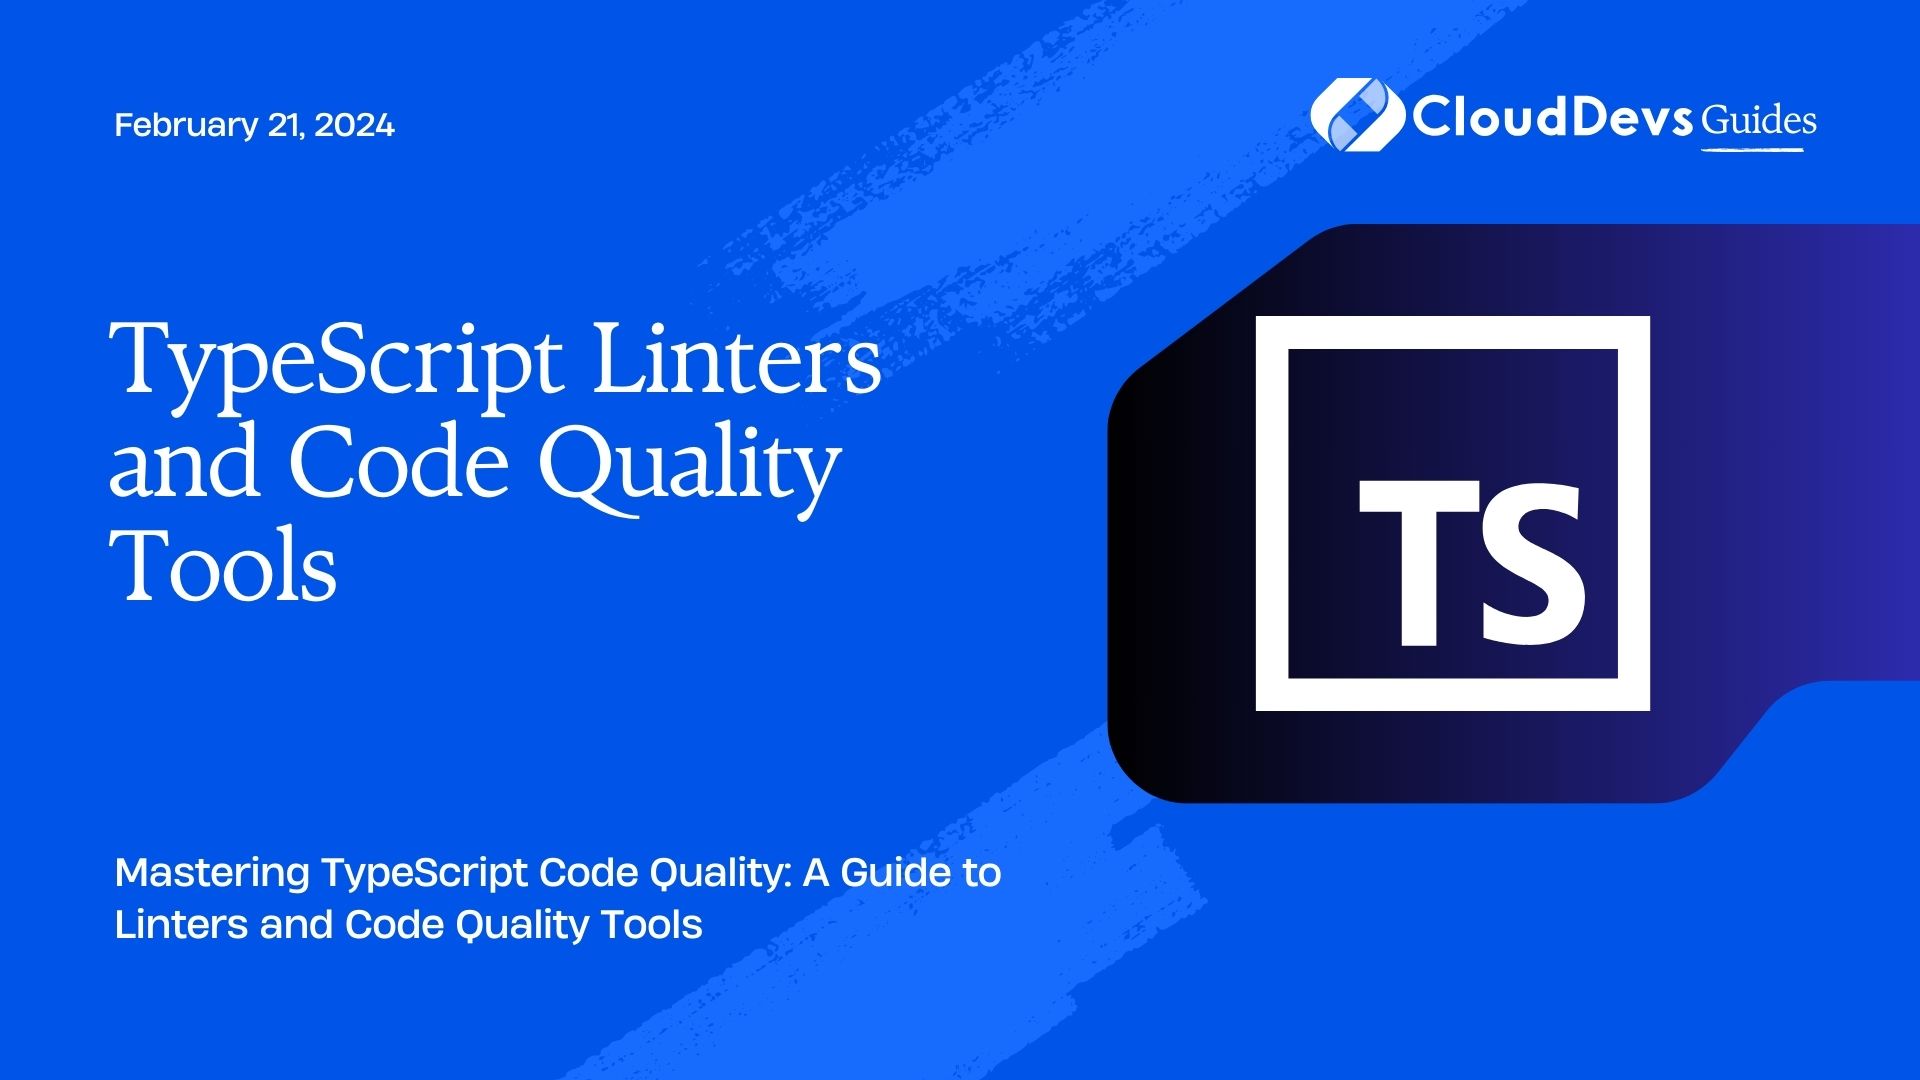 TypeScript Linters and Code Quality Tools